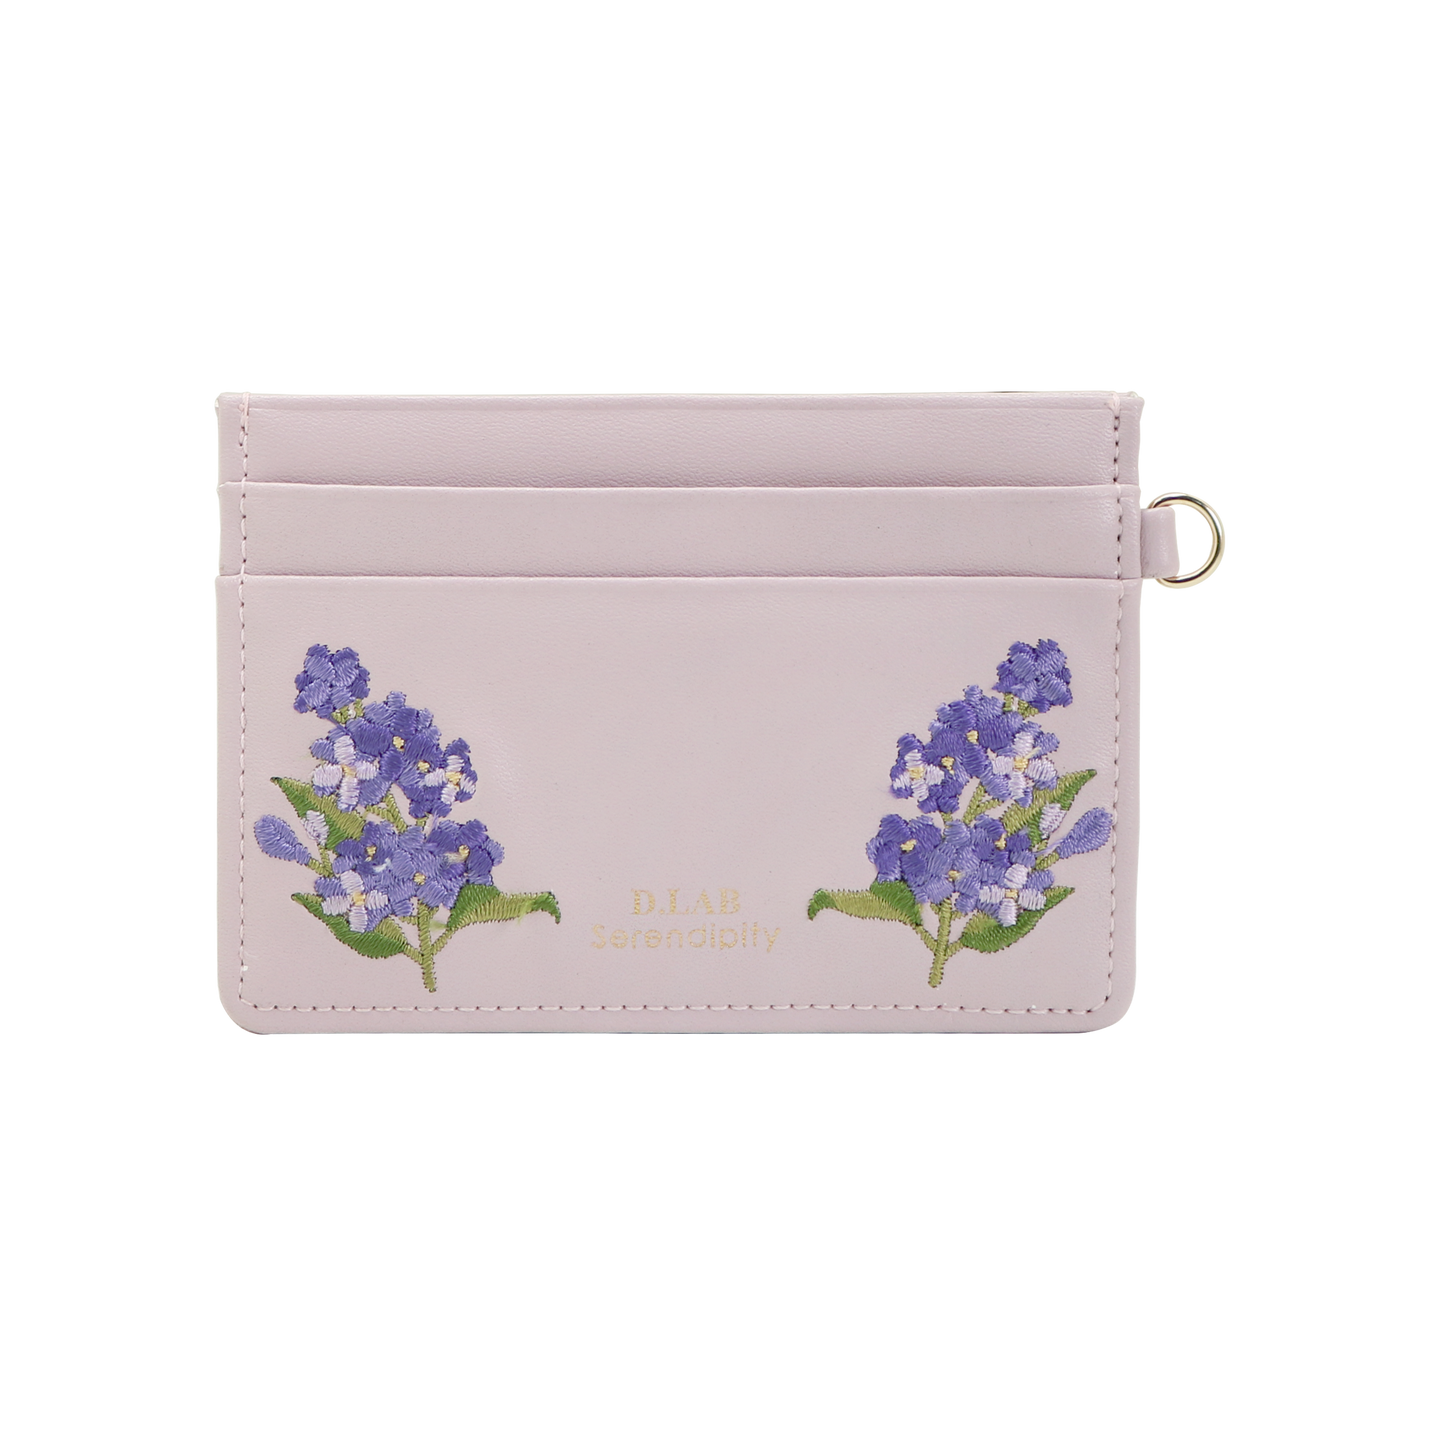 D.LAB Birth Flower Card Wallet May